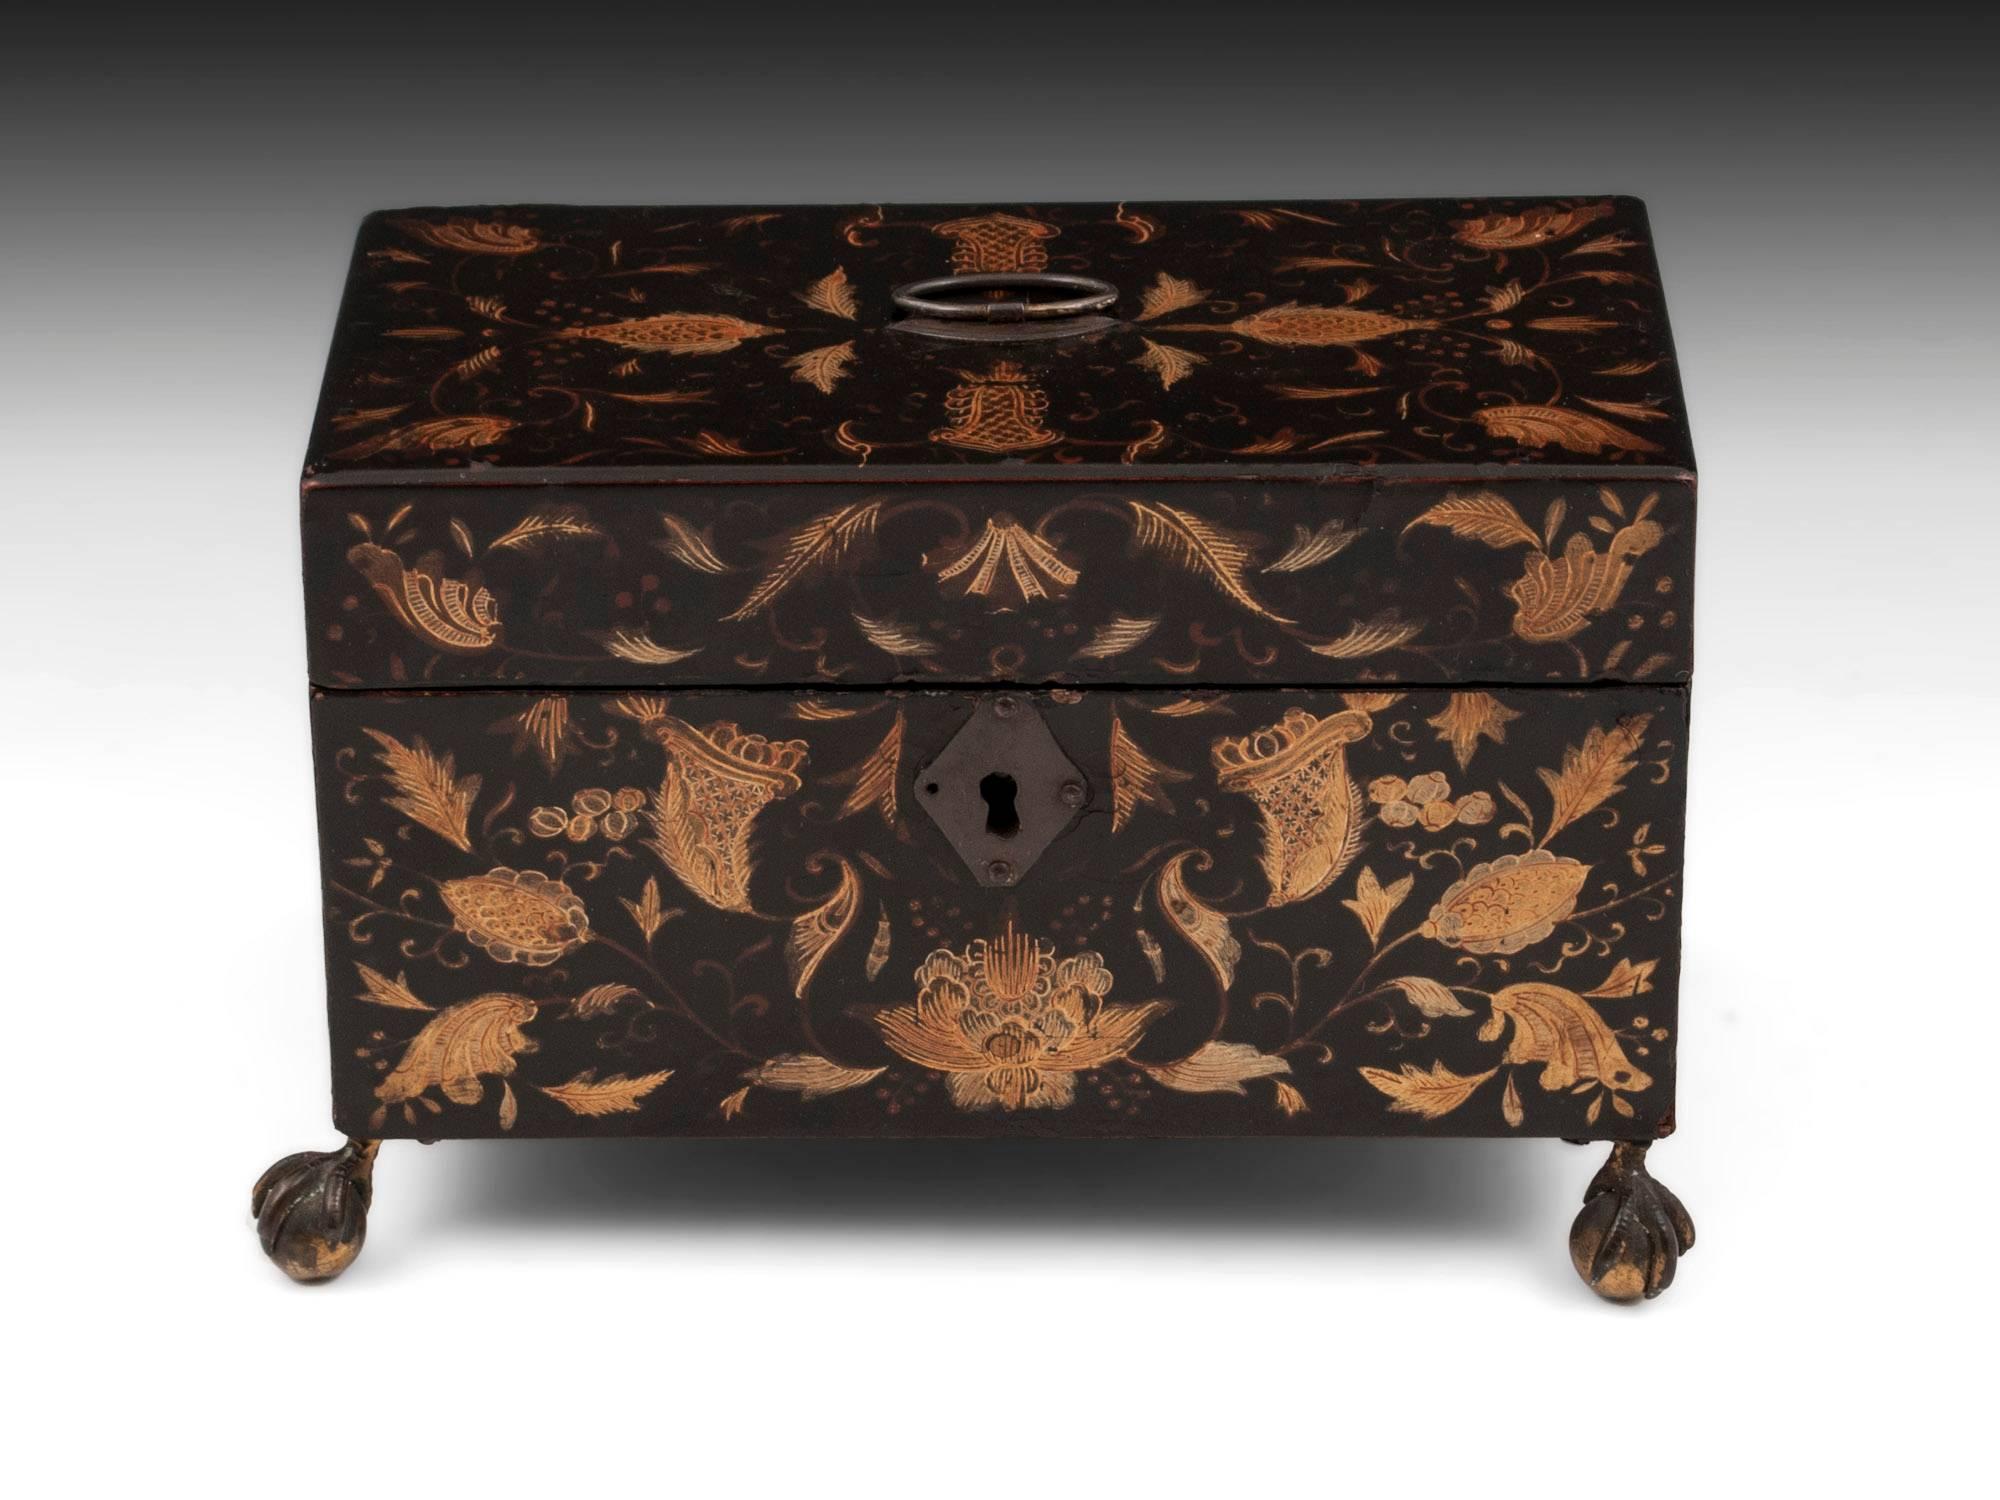 Lacquer tea chest with beautiful gold floral inlays on all sides with brass handle and escutcheon. Standing on four brass ball and claw feet. 

The interior contains two removable tea caddies with sliding lids, each adorned with conch shells and